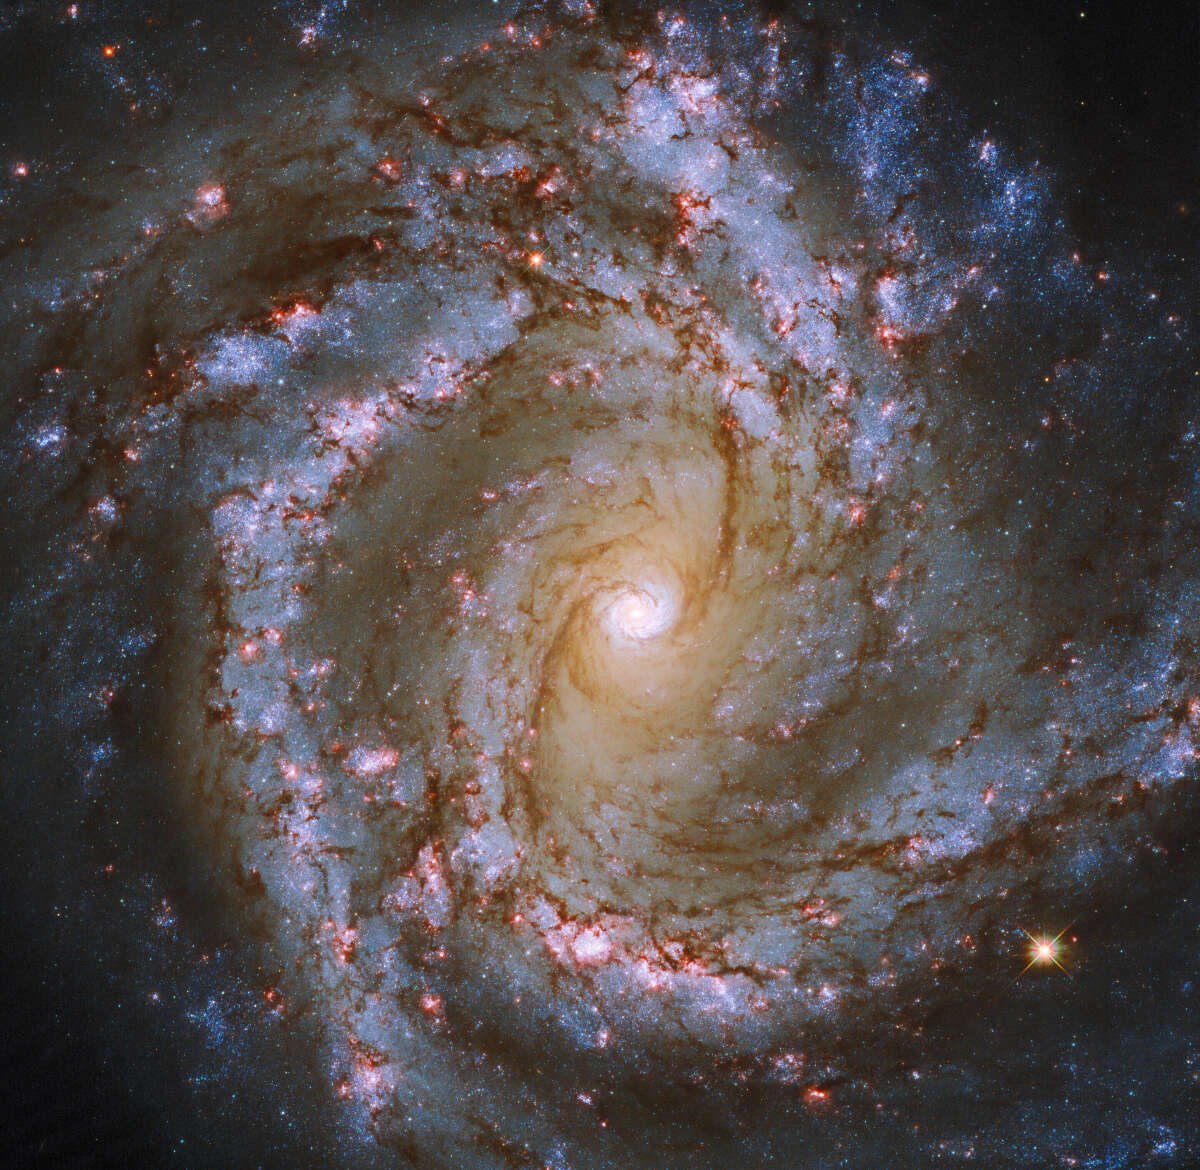 Hubble captures the mesmerizing spiral galaxy M61